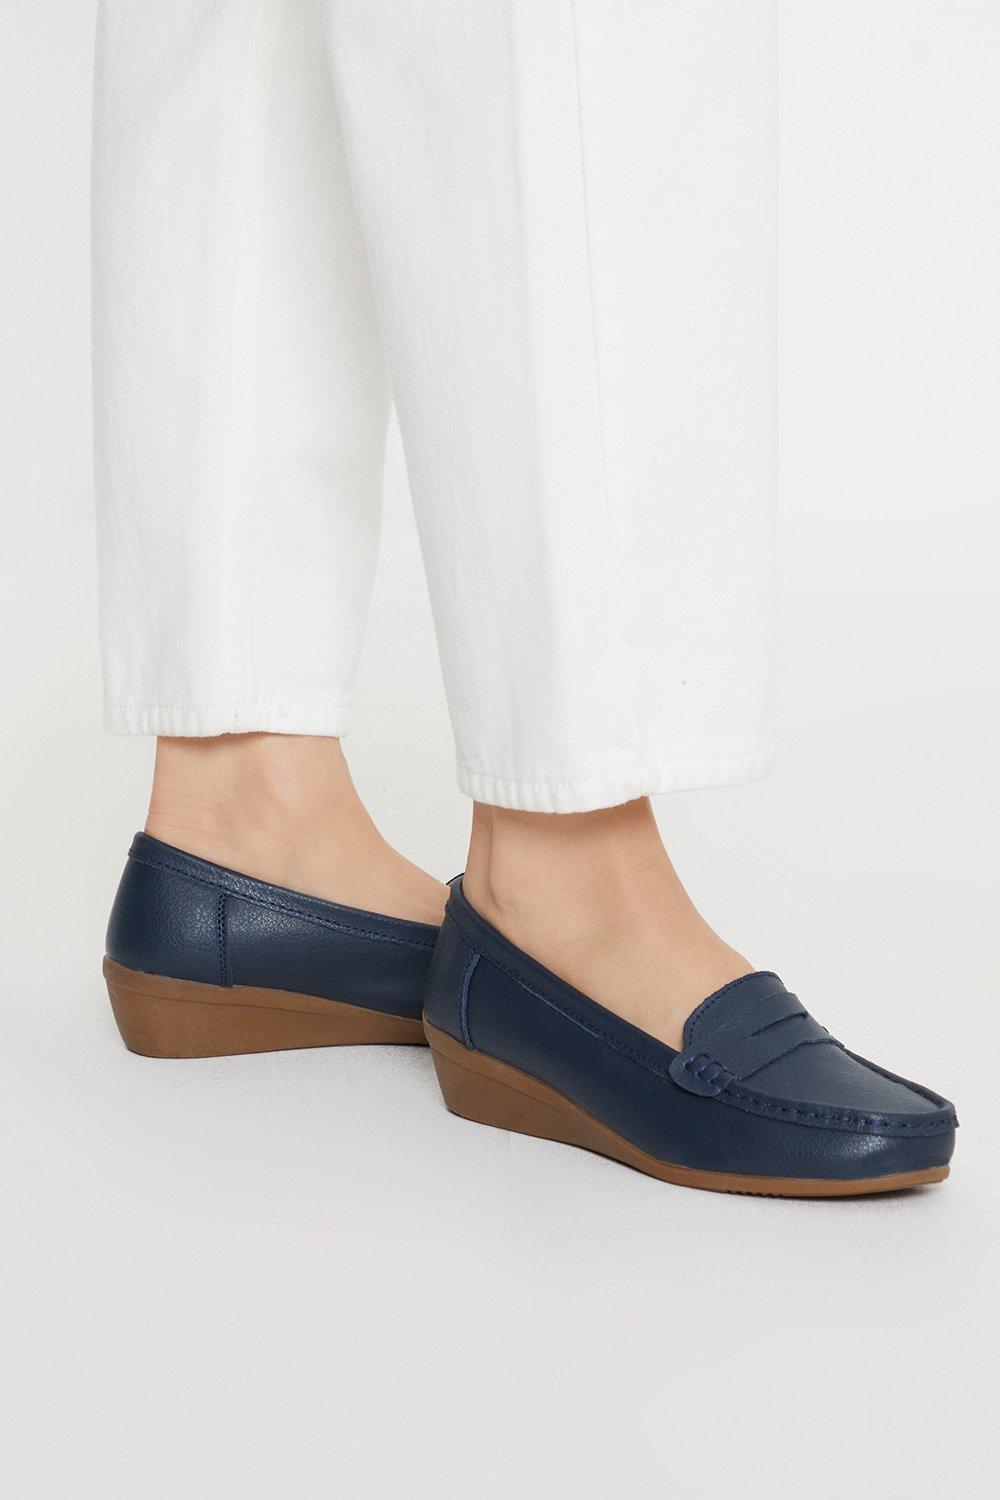 Women’s Good For The Sole: Wide Fit Niamh Leather Comfort Loafers - navy - 3